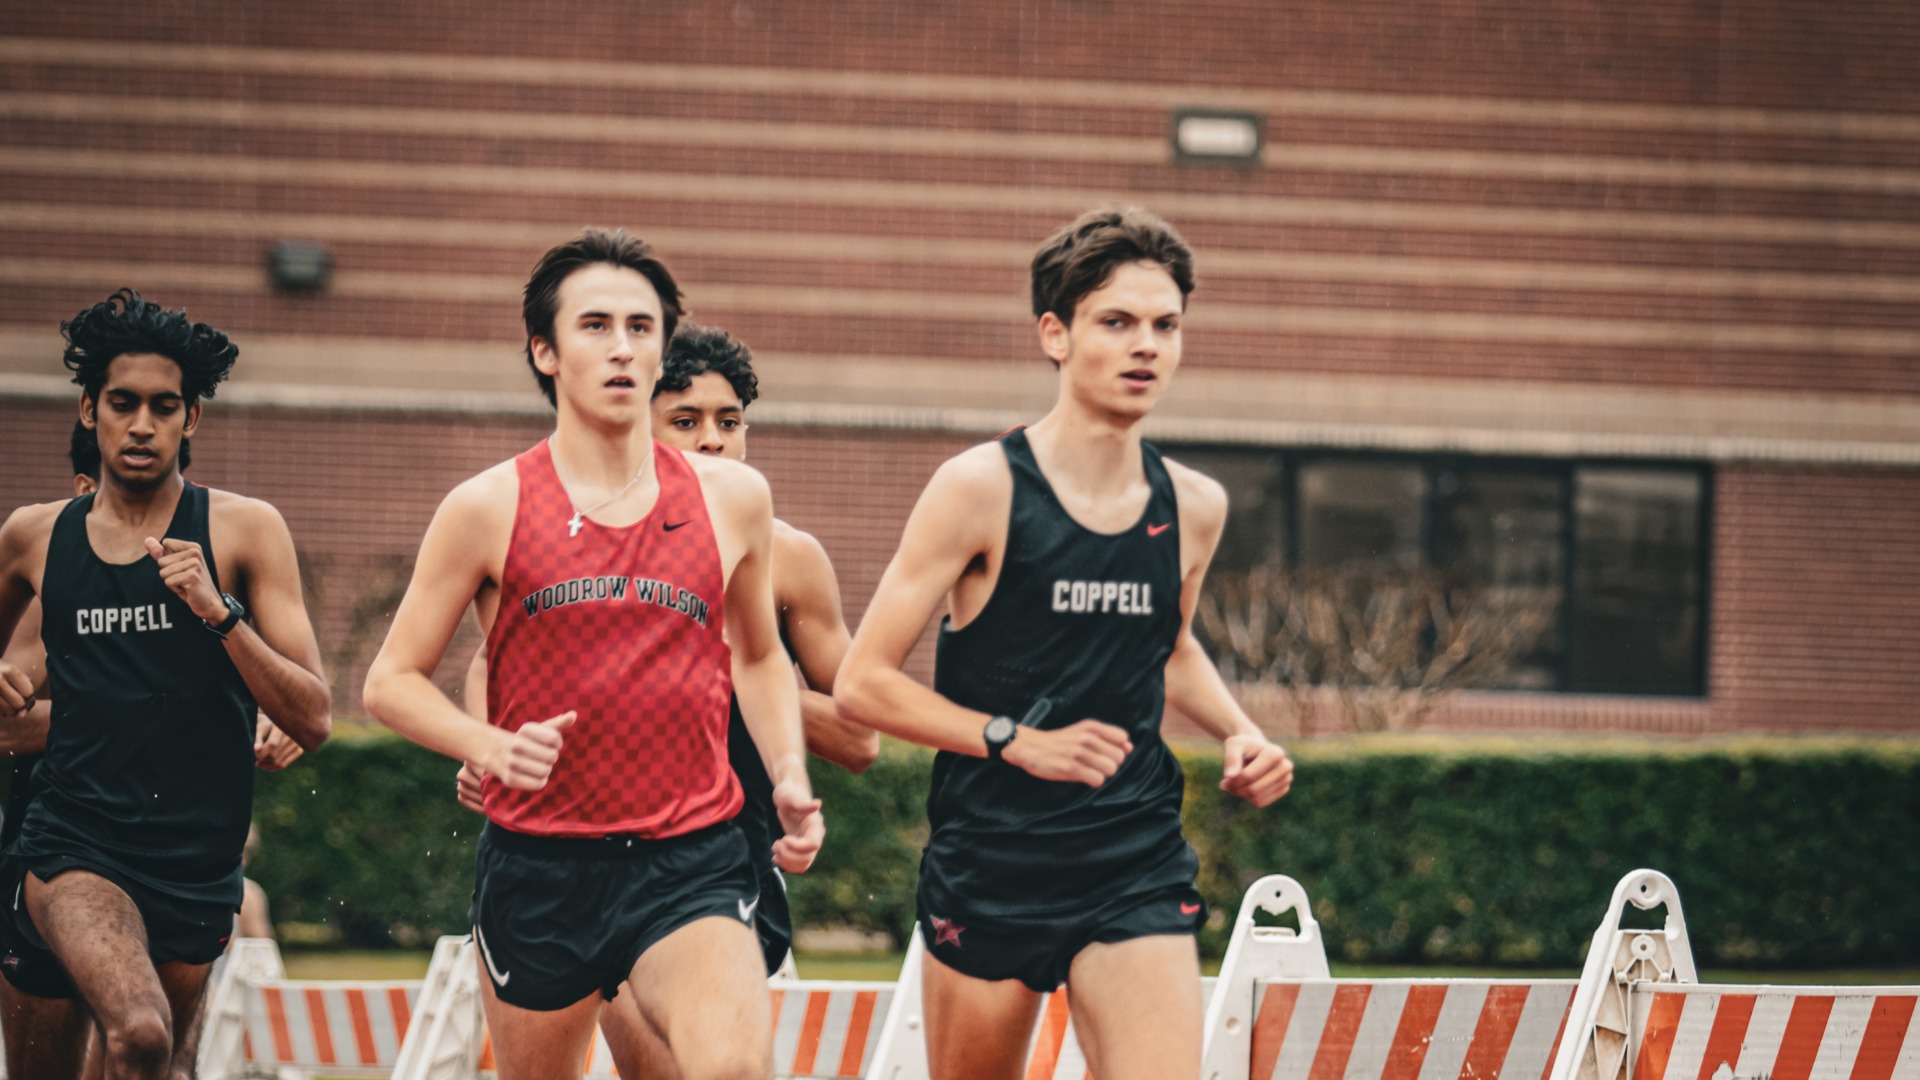 Coppell High SchoolSlide 8 - BOYS TRACK HEADED TO REGIONALS